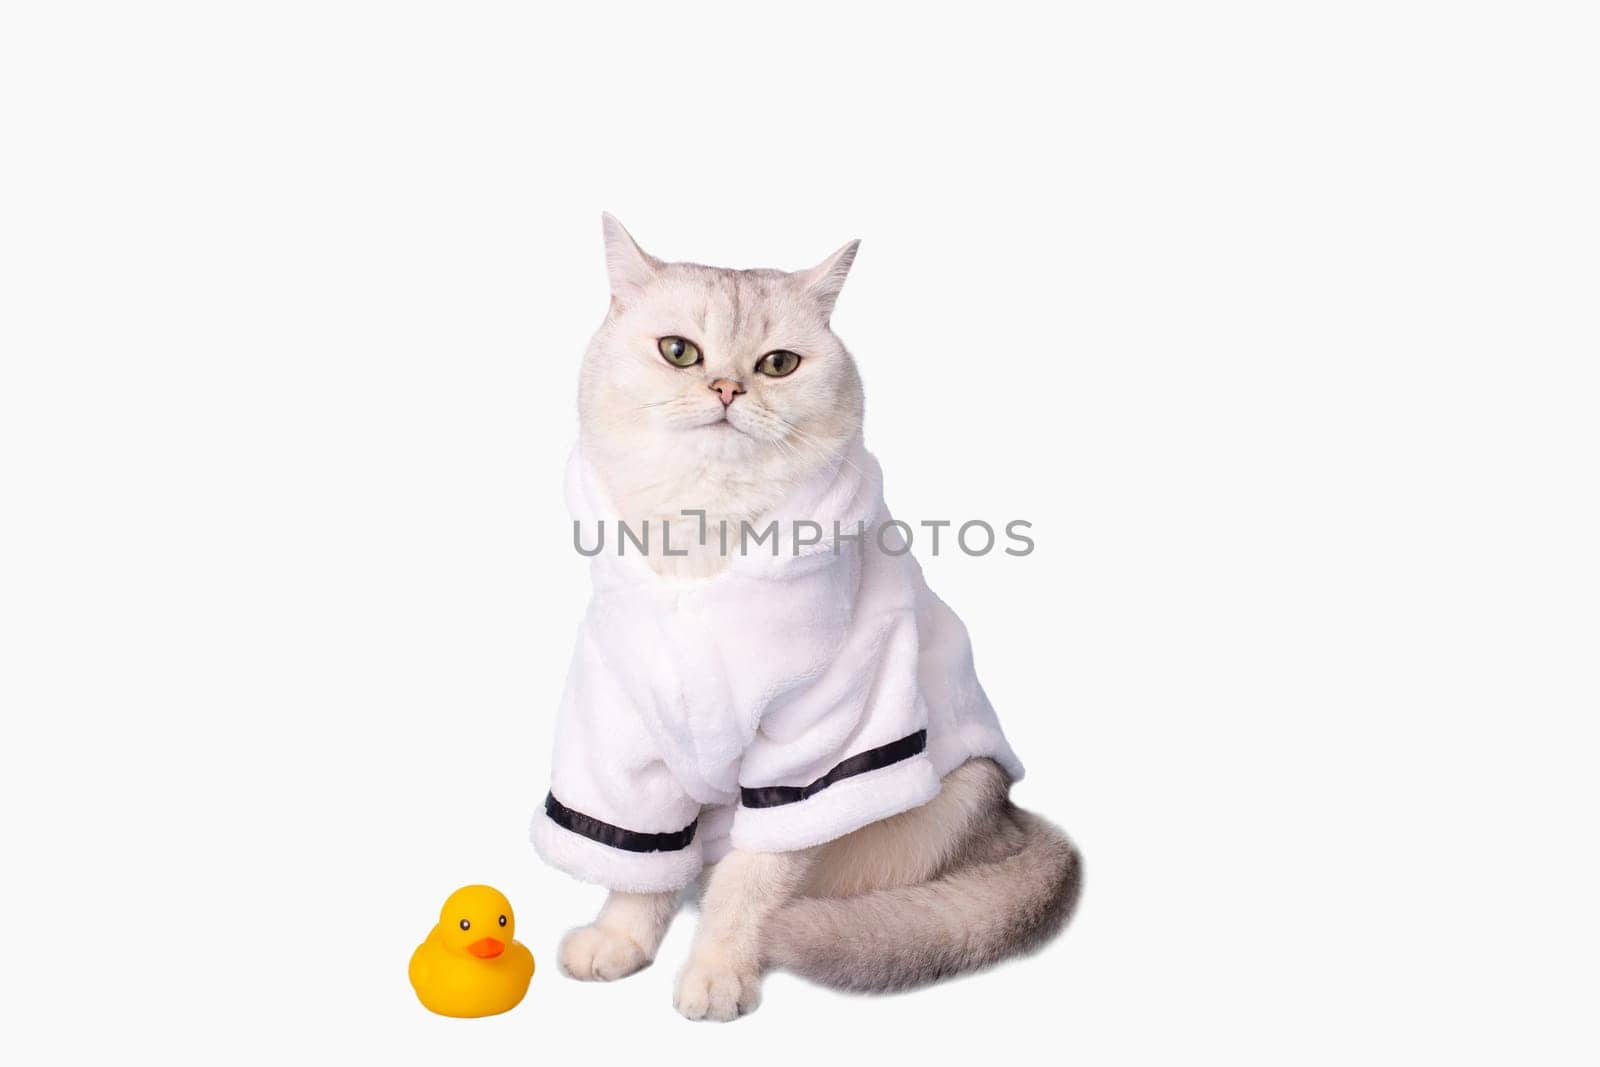 white cat is sitting in a white bathrobe, isolated on white background, next to a yellow rubber duck, looking at camera. Copy space